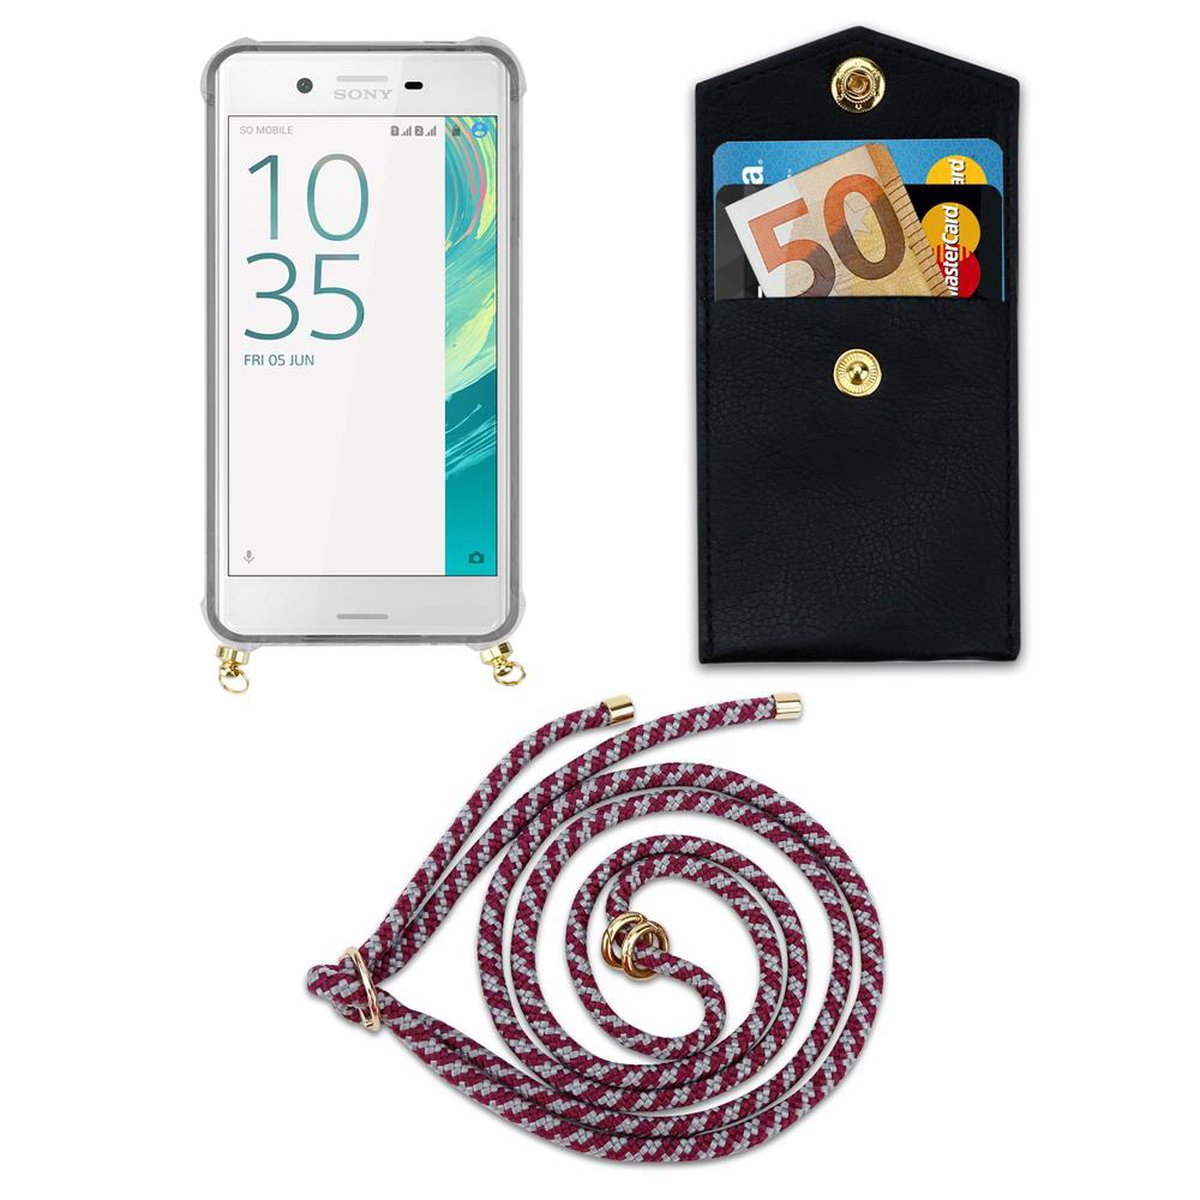 CADORABO Handy Kette Ringen, Backcover, Sony, abnehmbarer Gold mit WEIß Xperia ROT und X, Kordel Band Hülle